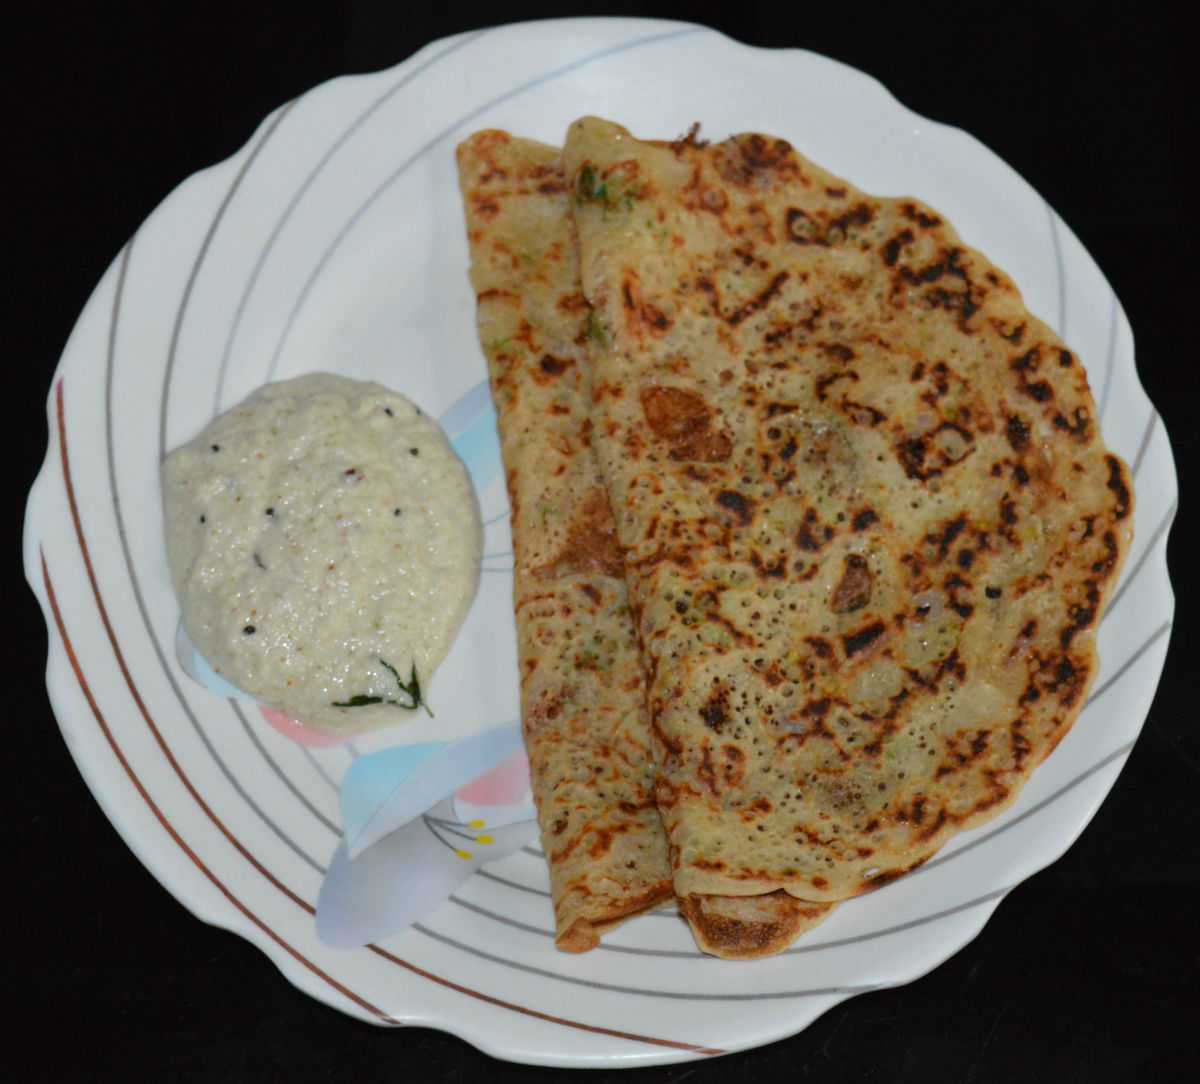 Step six: Remove it when both the sides are golden brown. Repeat the same steps for making all the pancakes. Serve them with coconut chutney or tomato sauce. Enjoy the taste!